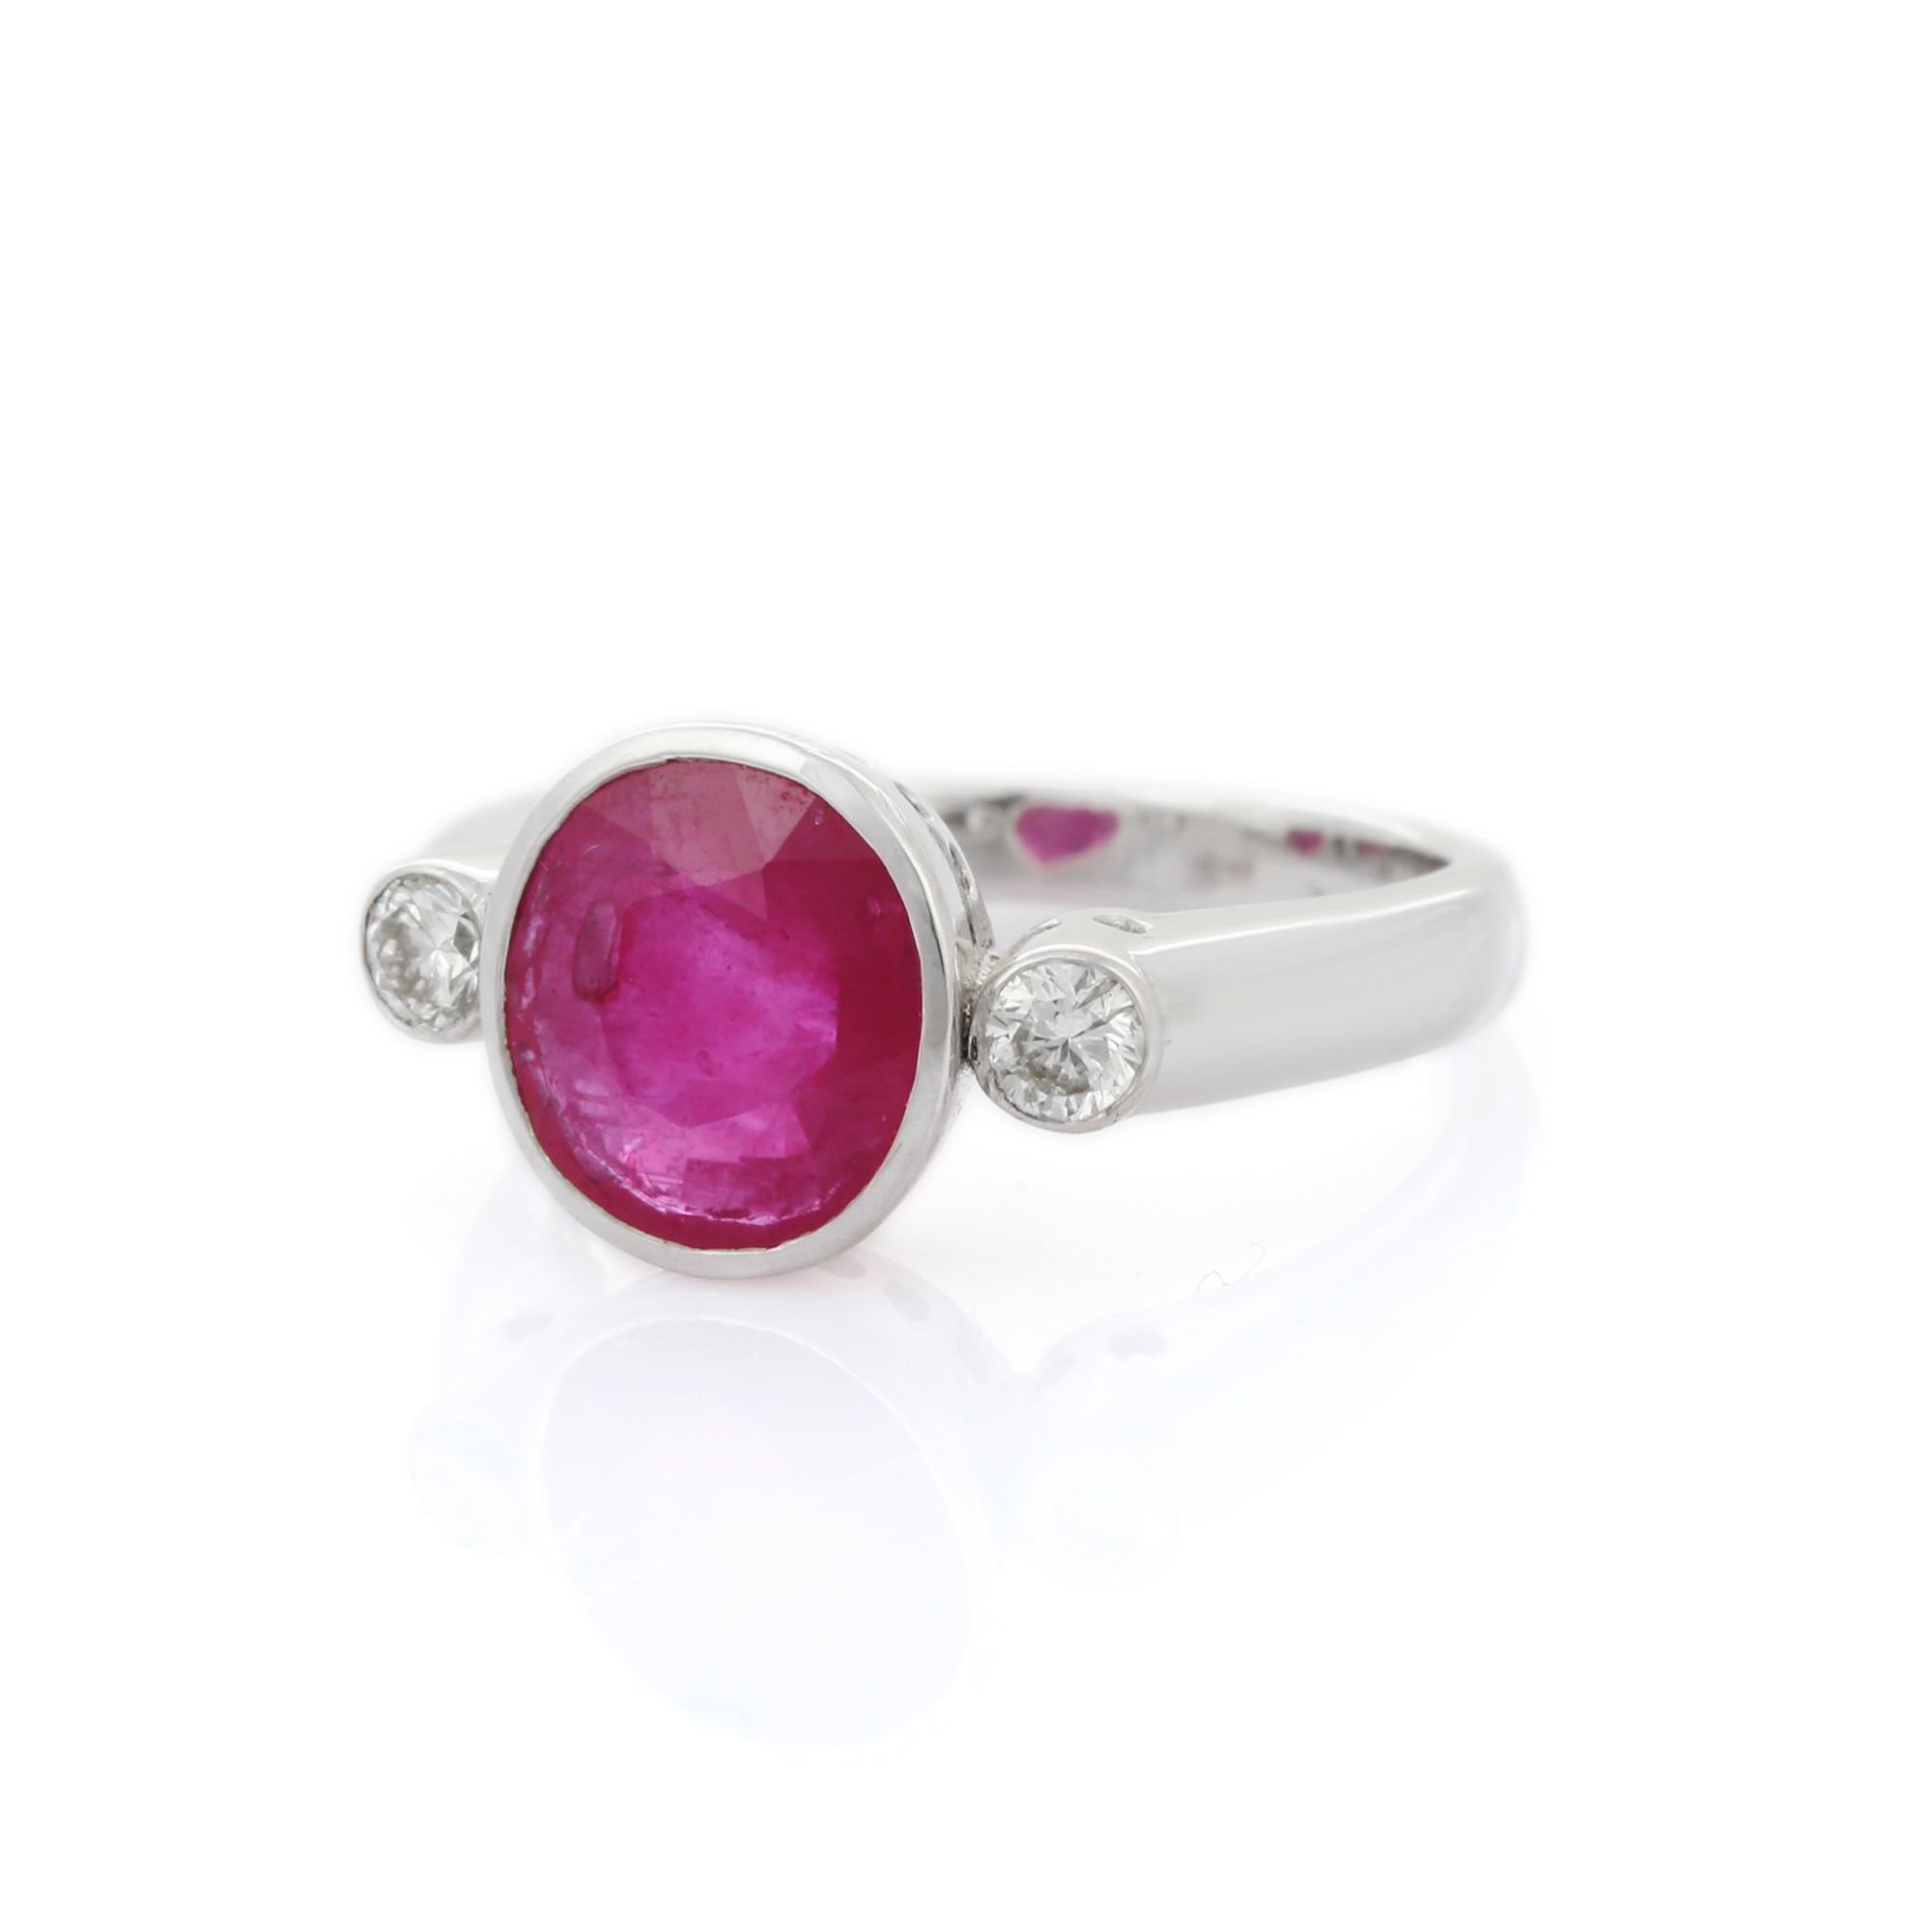 For Sale:  3 Carat Classical Round Cut Ruby and Diamond Three Stone Ring in 18K White Gold  3